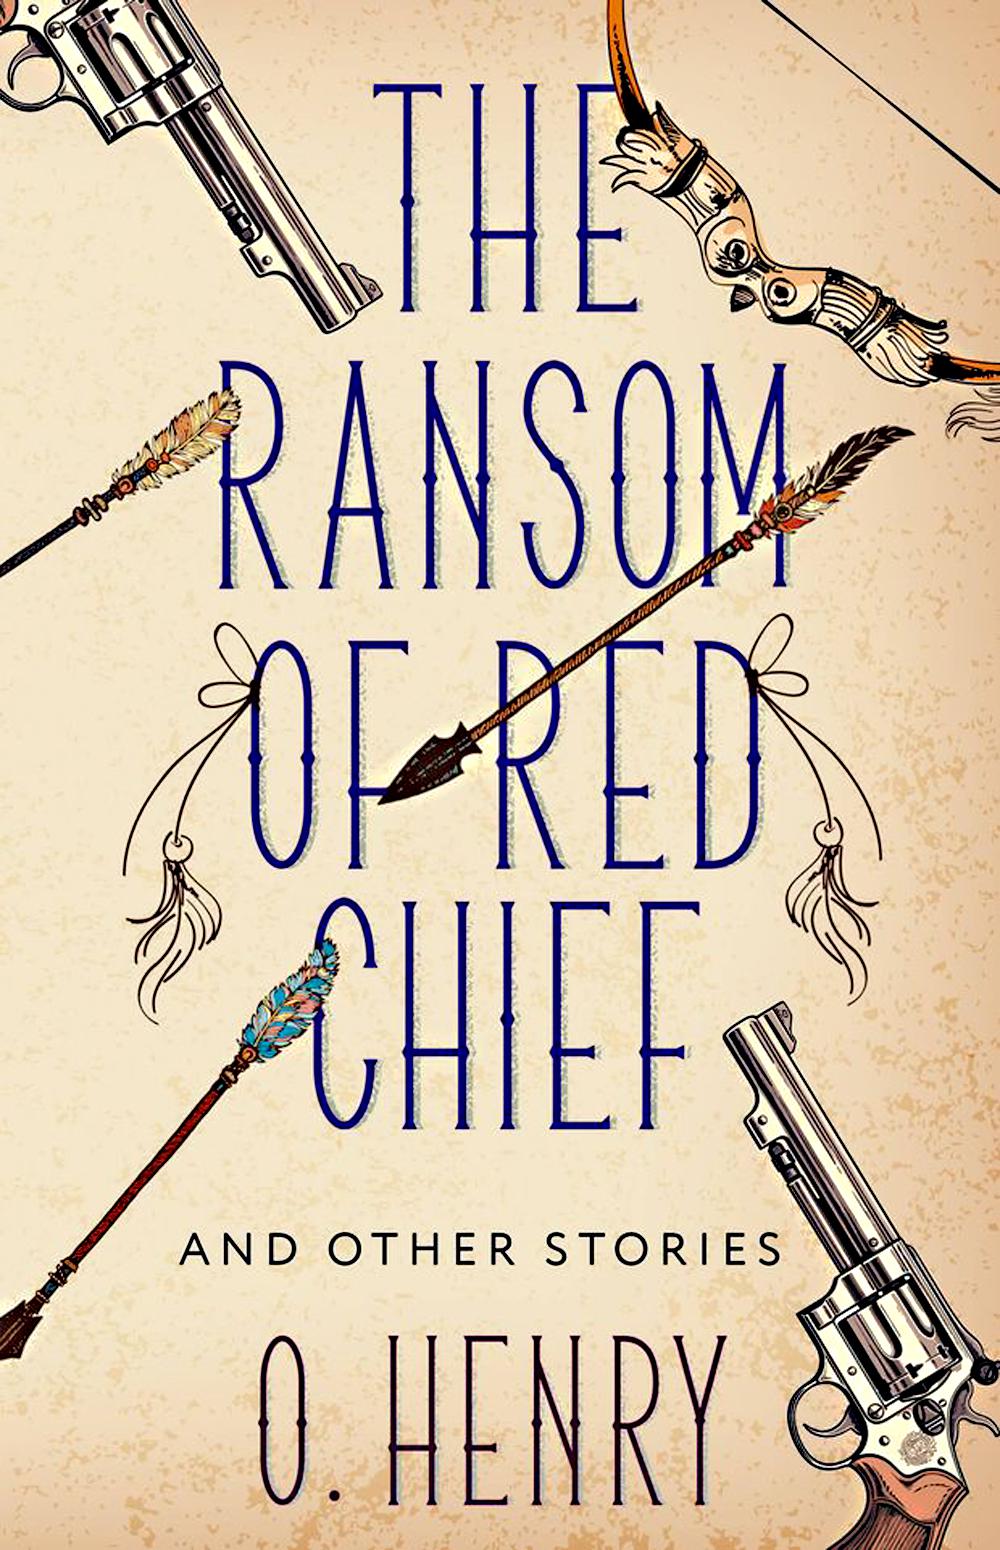 The Ransom of Red Chief and other stories (/)